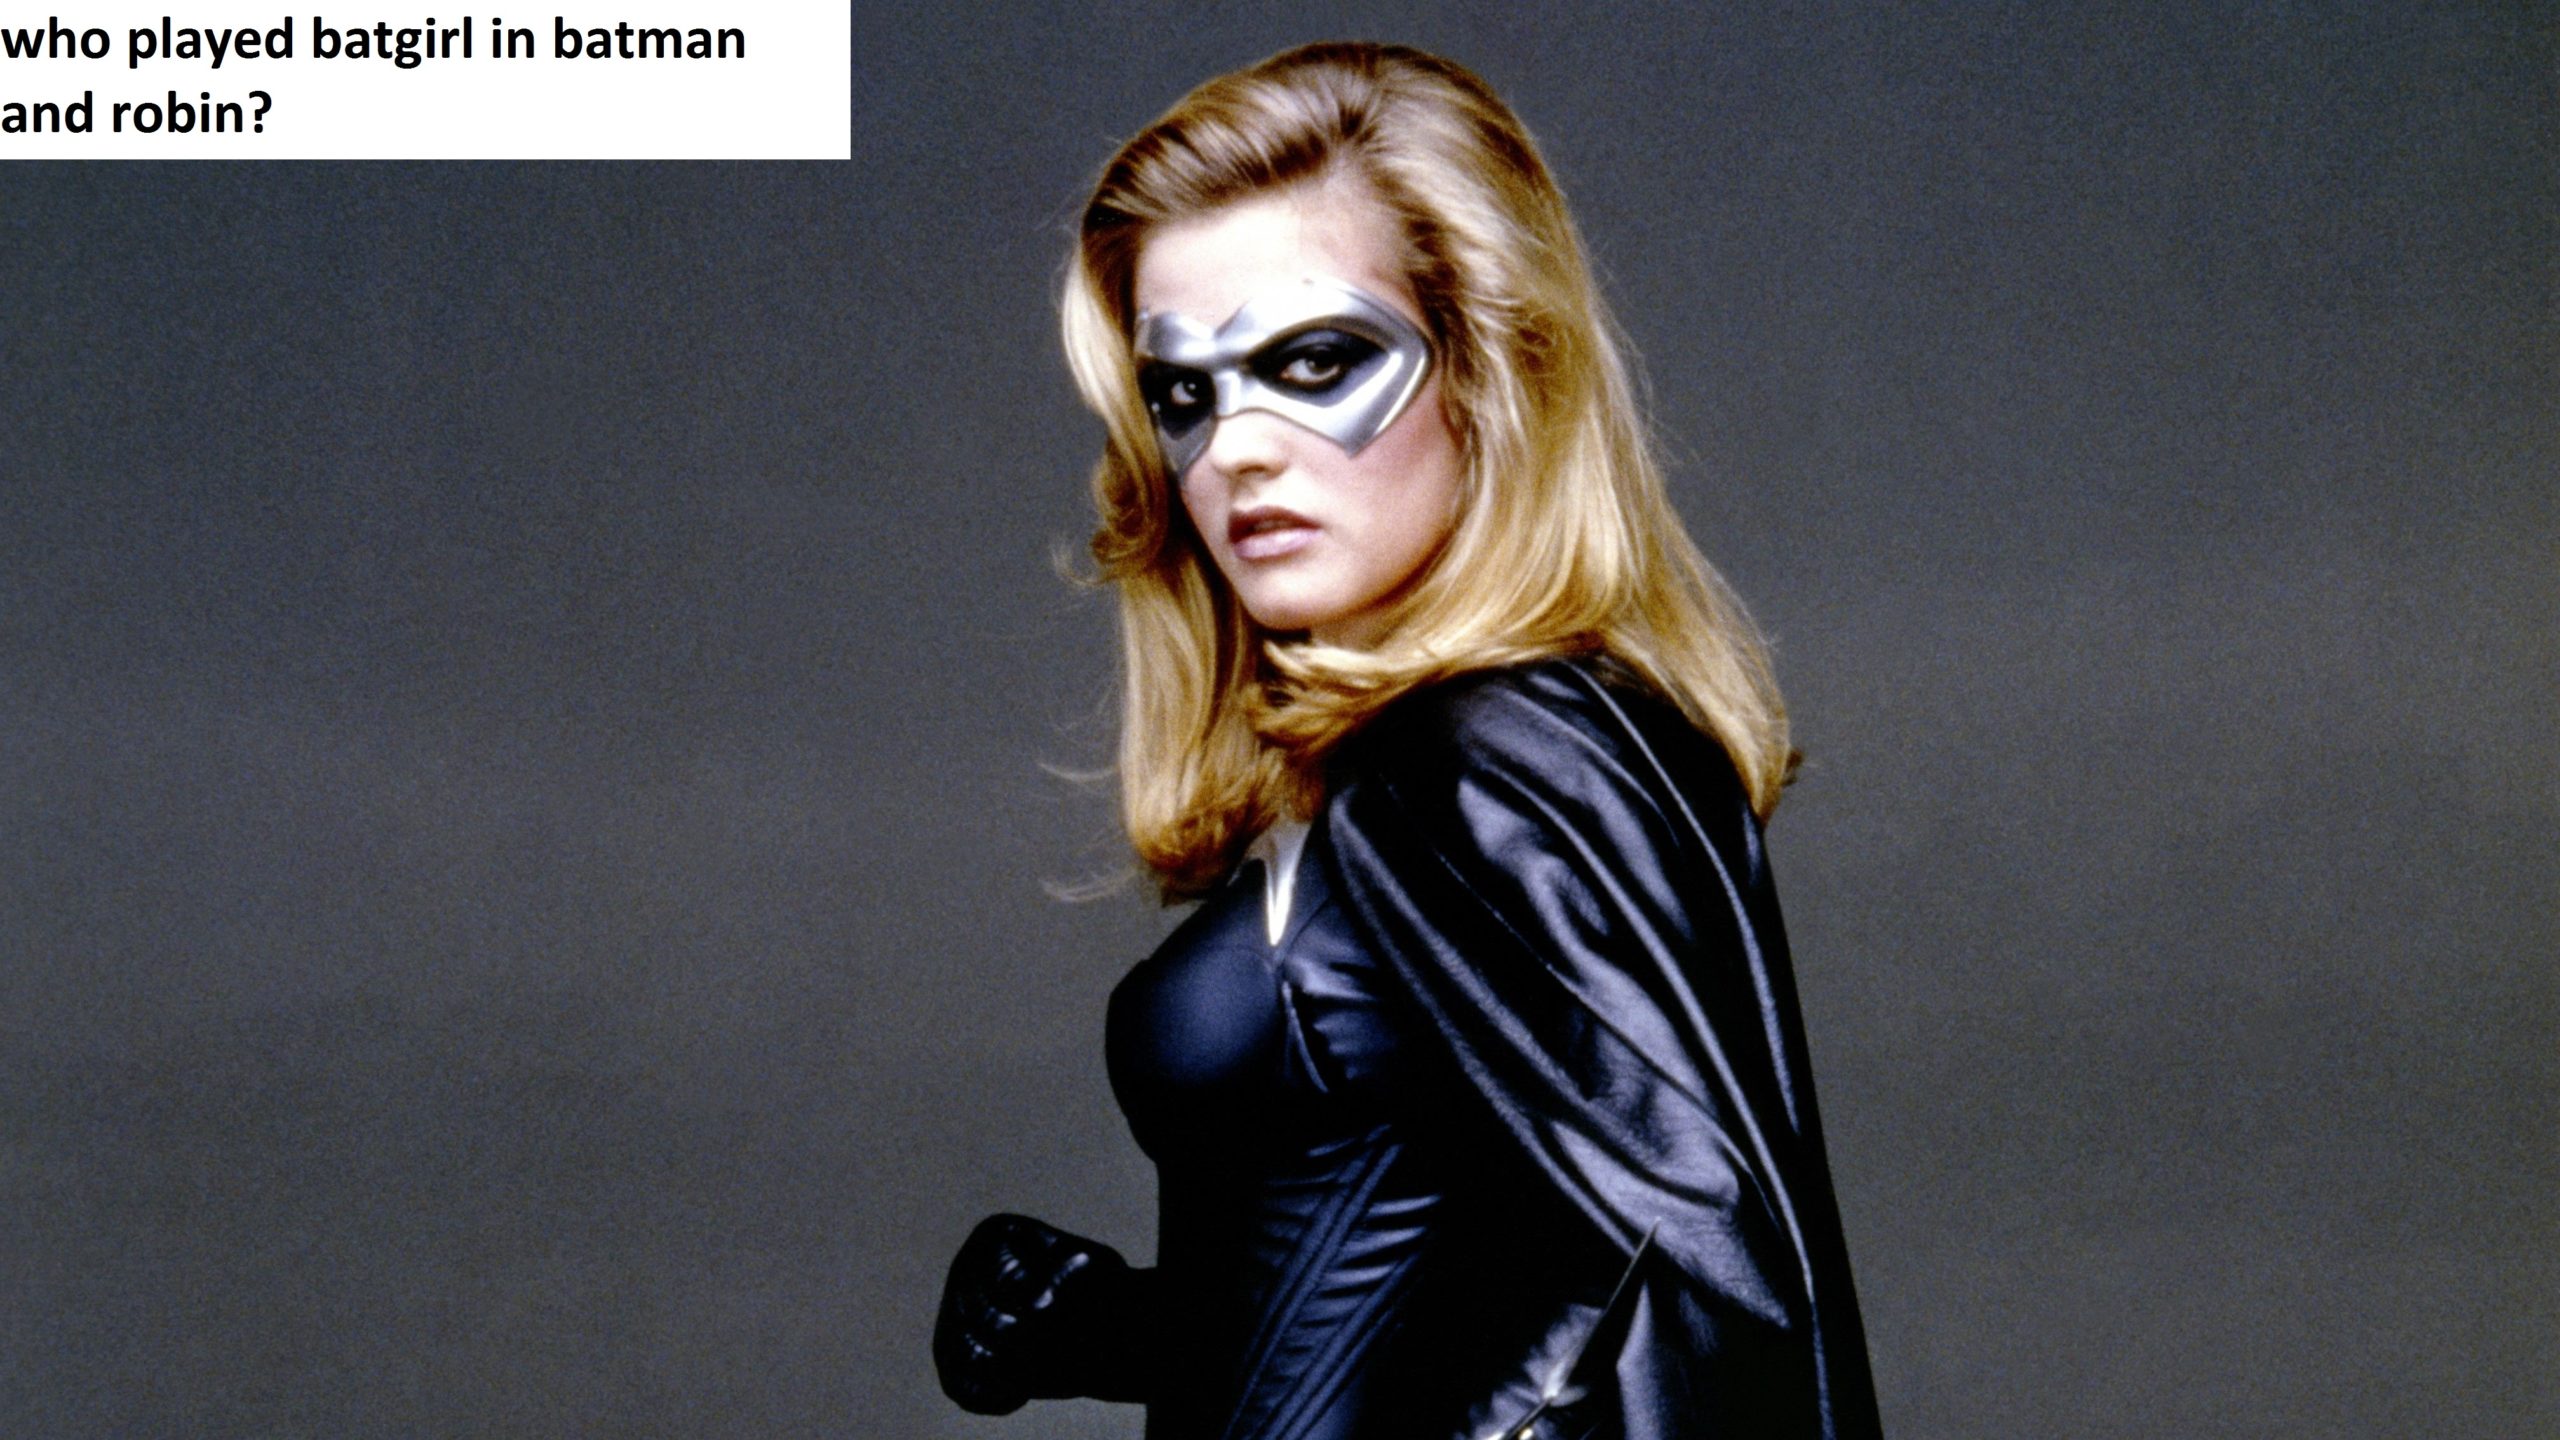 who played batgirl in batman and robin?